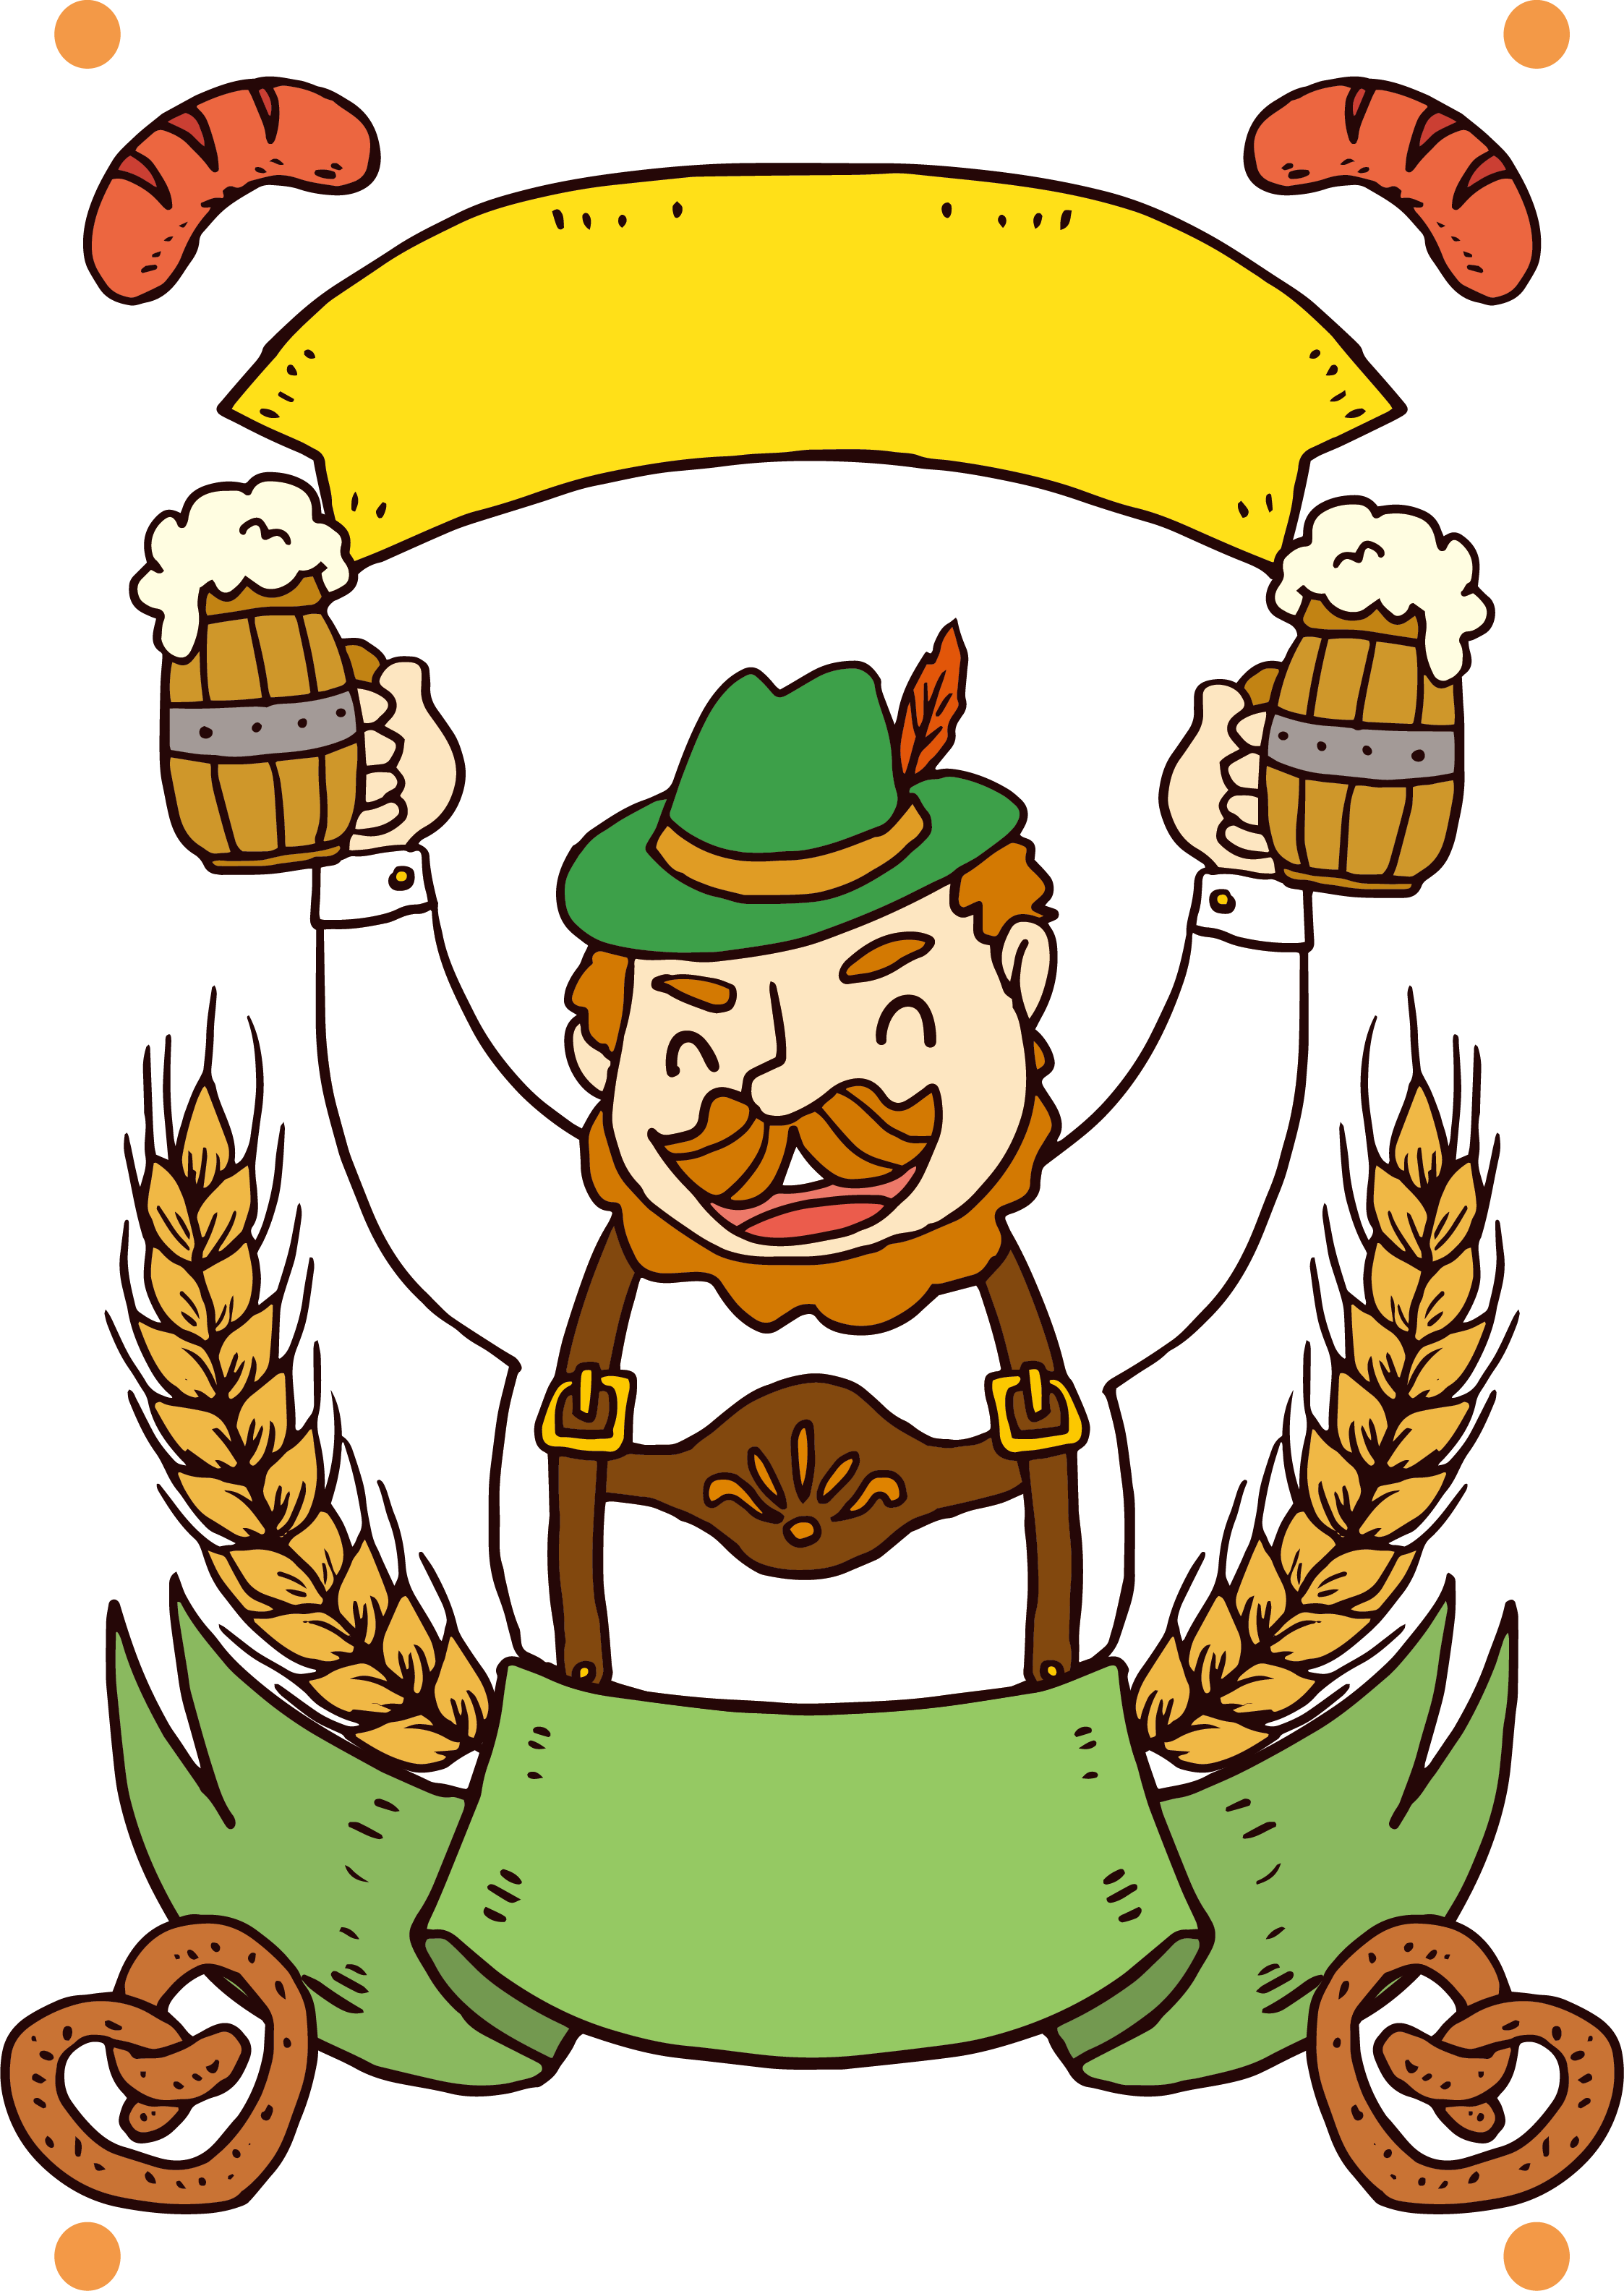 A Cartoon Of A Man Holding Two Mugs Of Beer